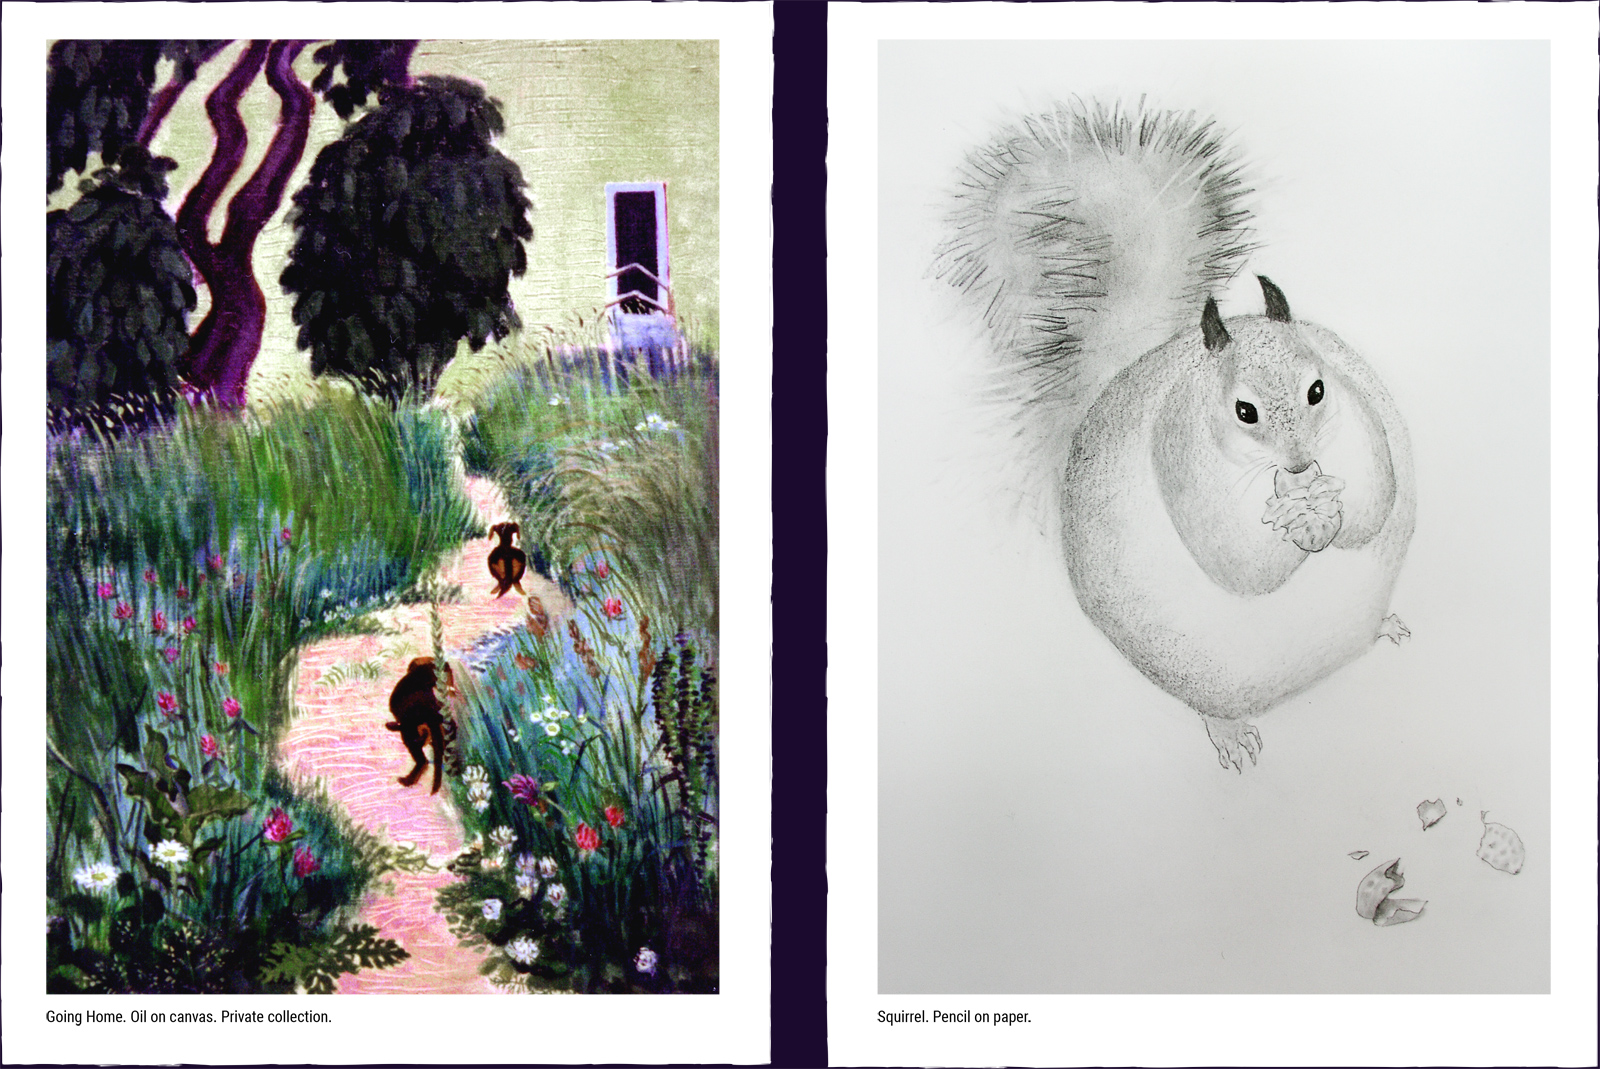 Two animal paintings. (1) Going Home. Oil on canvas. Private collection. (2) Squirrel. Pencil on paper.